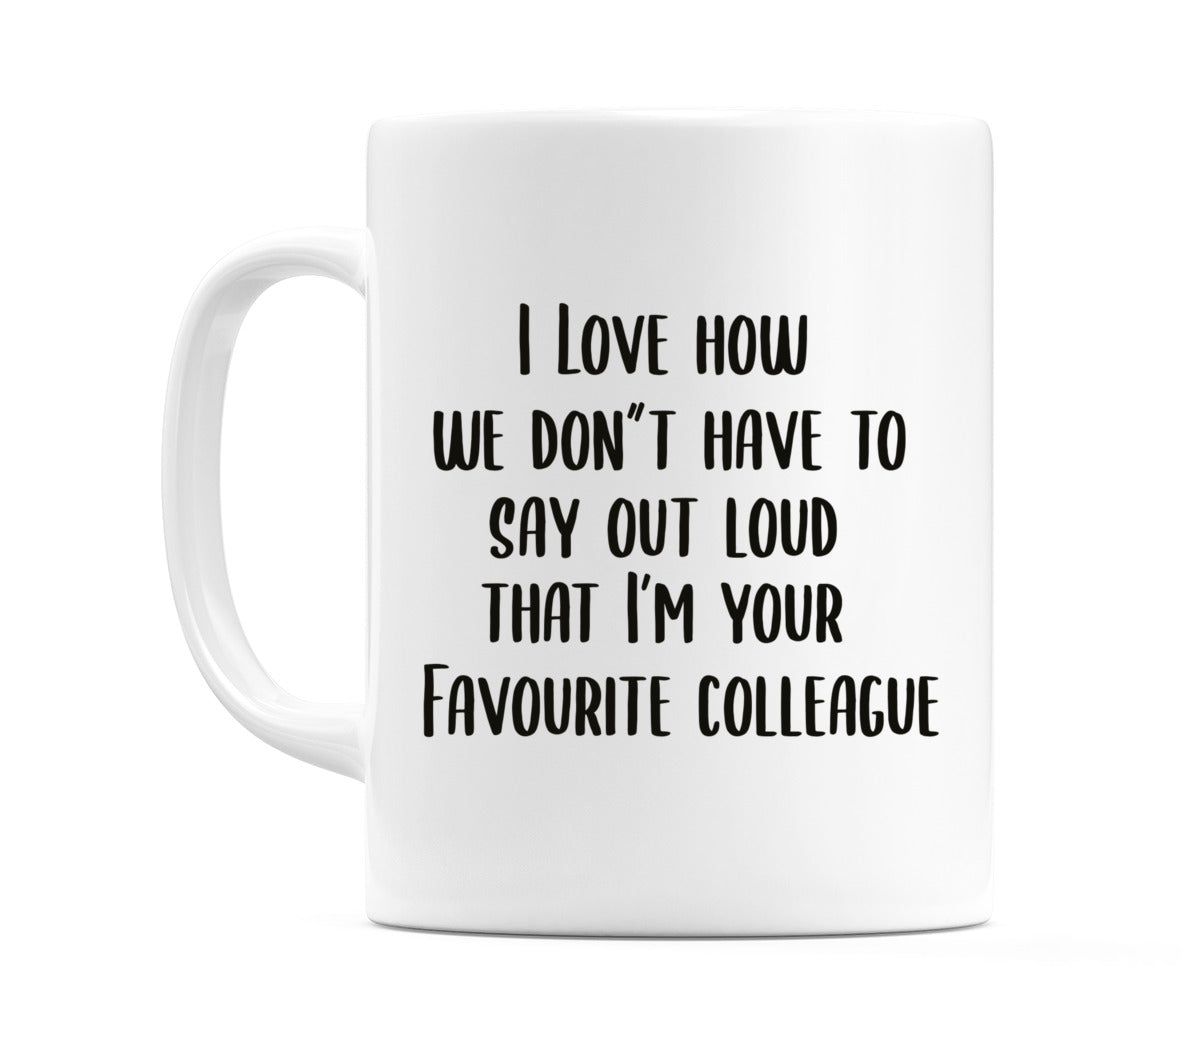 I Love How we Don't Have to Say it out Loud that I'm your Favourite Colleague Mug